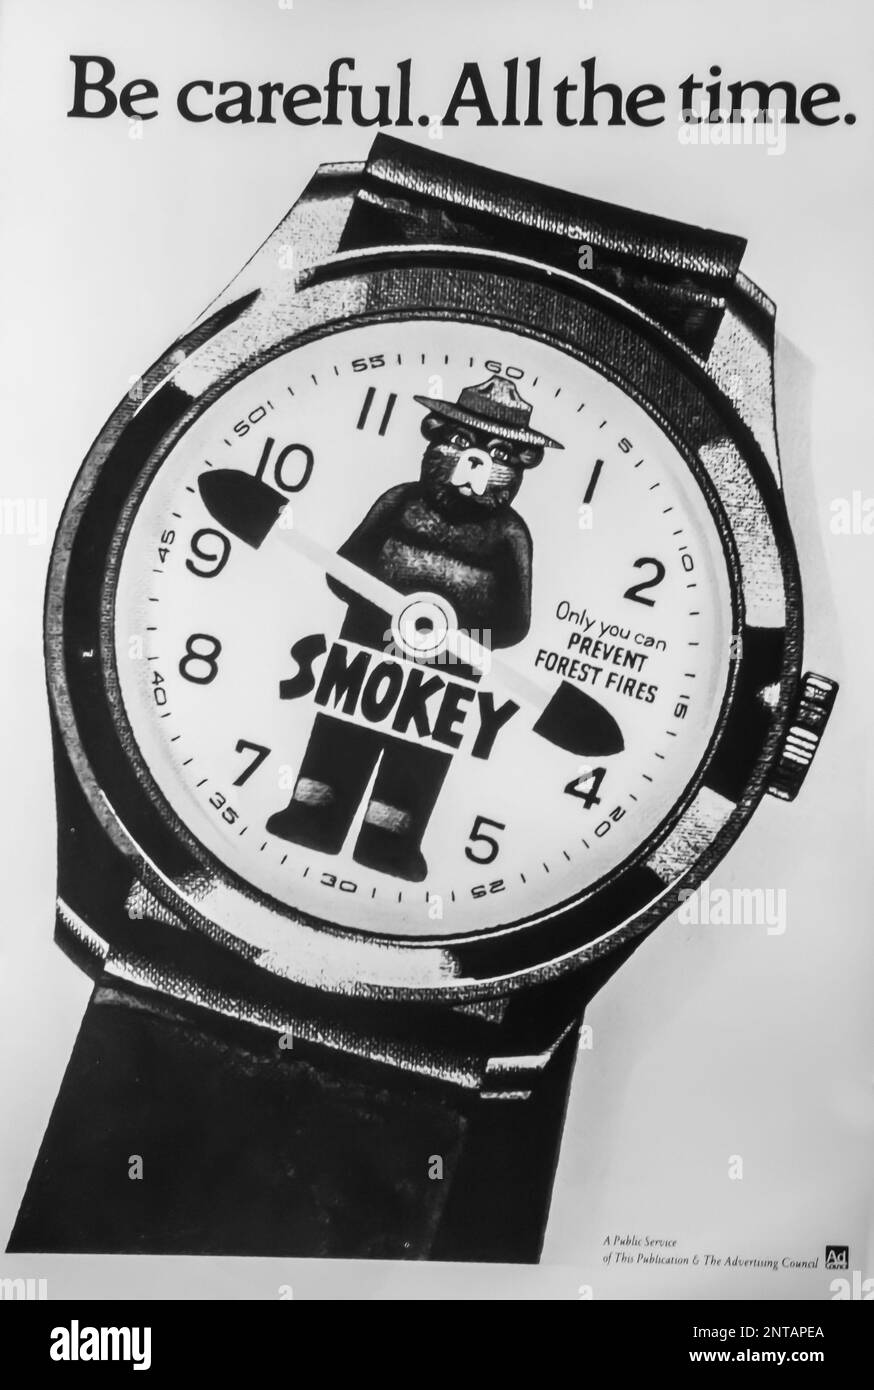 1979 Smokey the Bear: Be Careful All the Time print ad Stock Photo